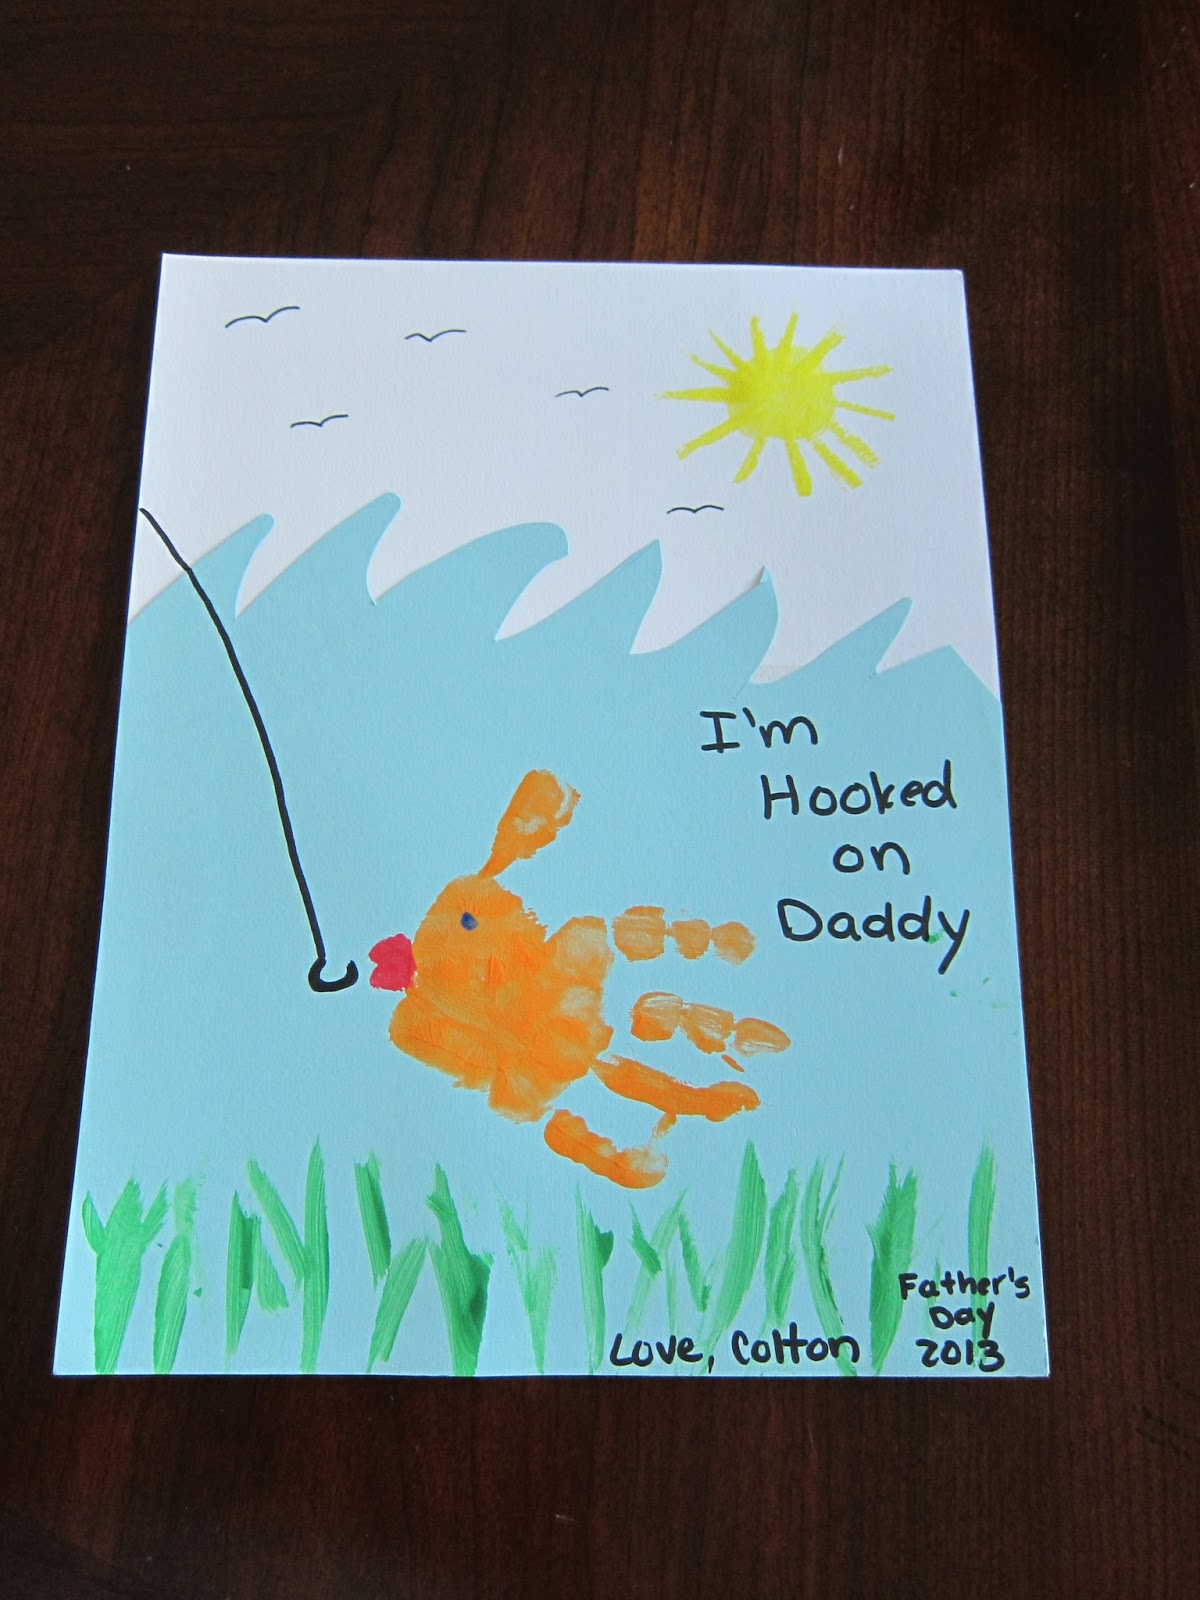 a-day-in-the-life-of-a-robison-fathers-day-crafts-fathers-day-crafts-father-day-crafts